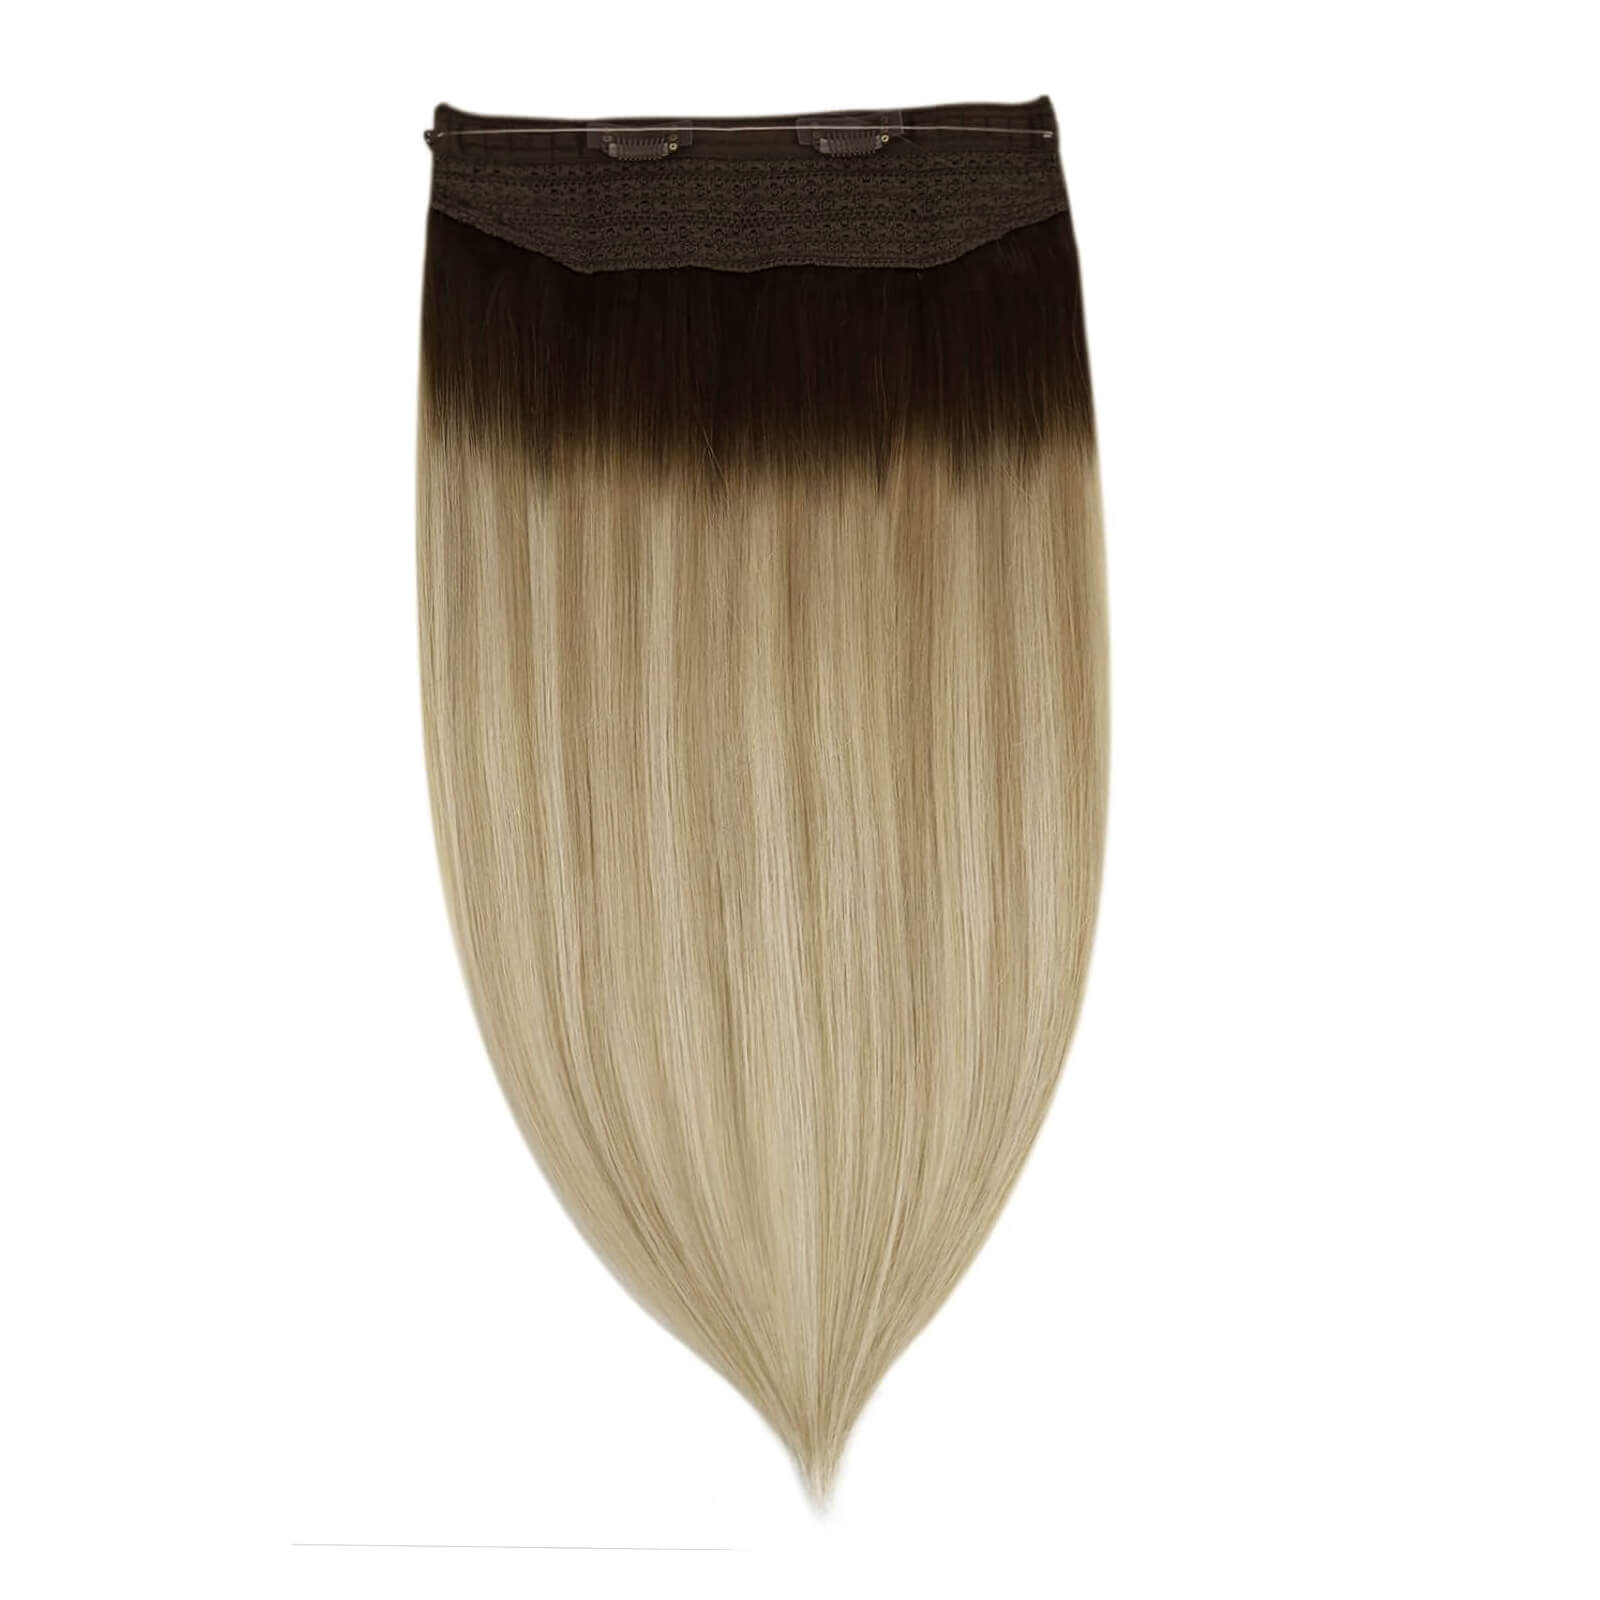 Light Blonde Wire Hair Extension with Clips 100g Human Hair Extension